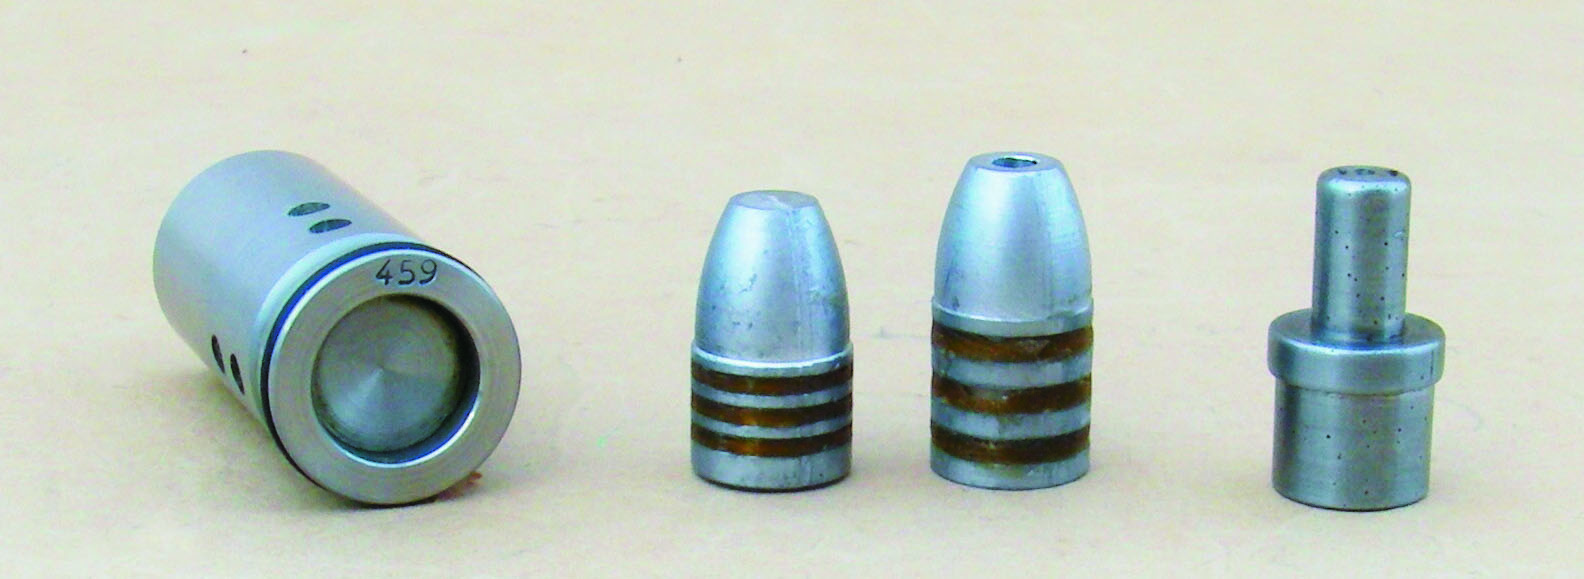 Brian tried sizing cast bullets to .458 and .459 inch. There was no perceptible difference in accuracy with the factory open sights.